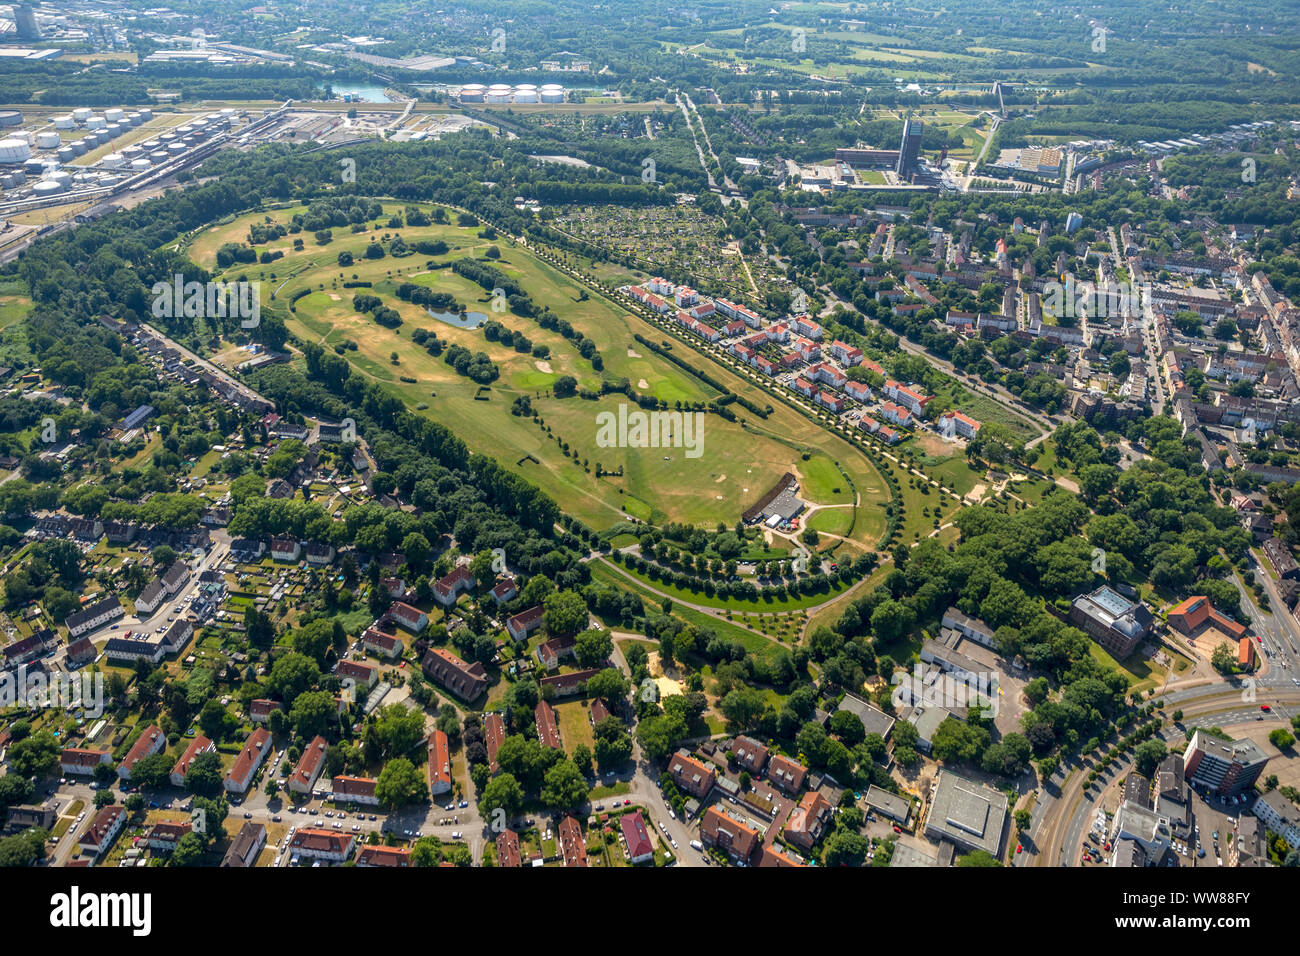 Aerial view, golf course Schloss Horst, former trotting course Horst, Schloss Horst, residential area, one-family houses, multi-family houses, Gelsenkirchen, Ruhrgebiet, North Rhine-Westphalia, Germany Stock Photo